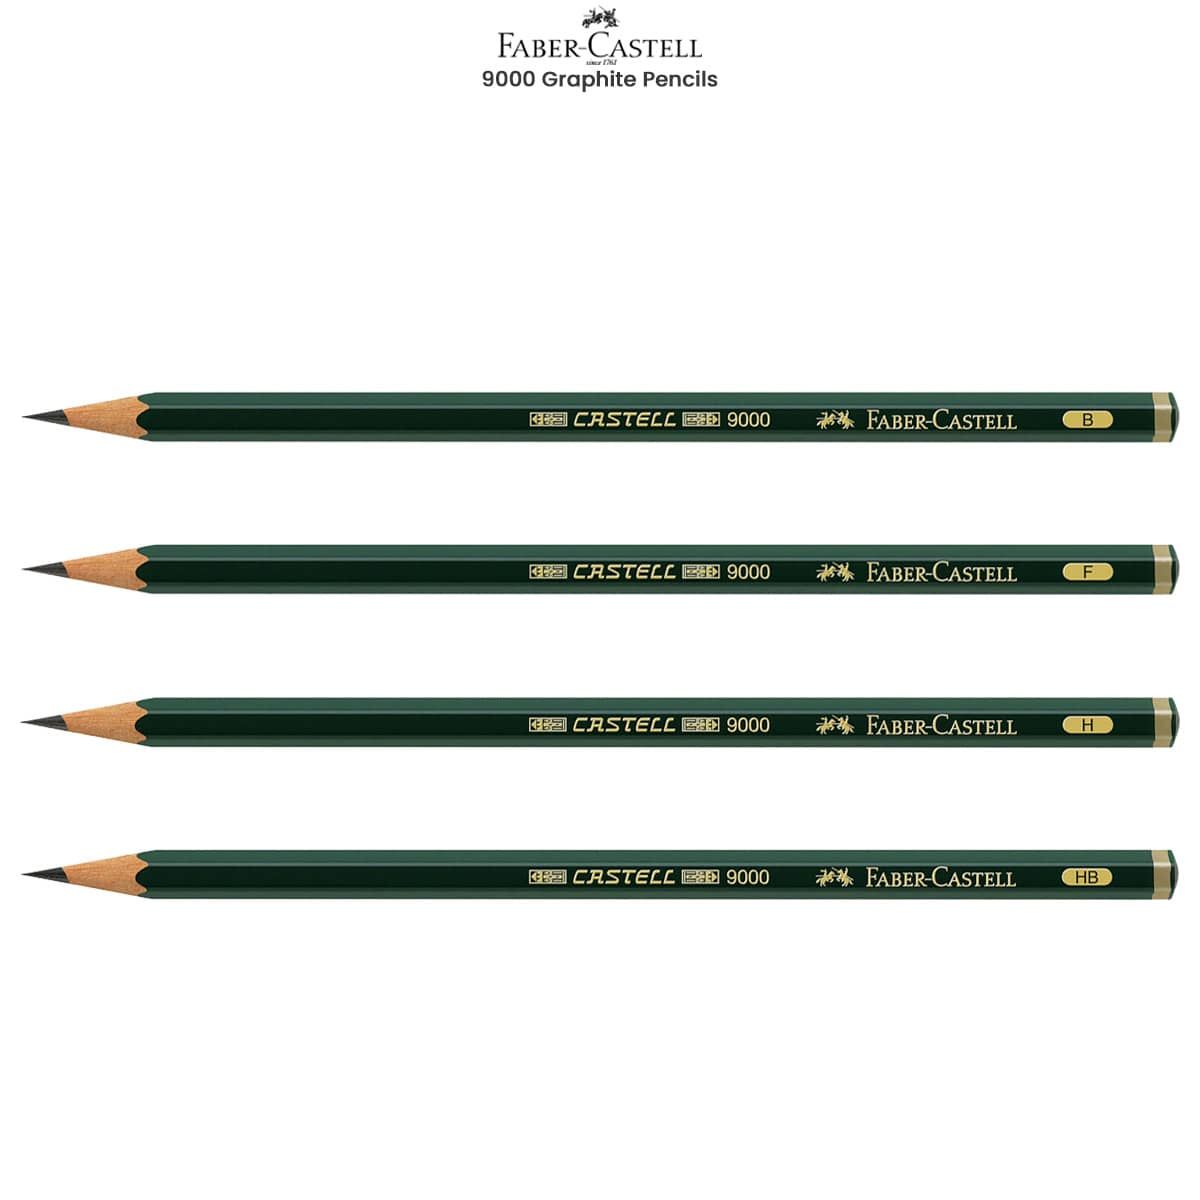 Faber-Castell Graphite Pencil - Castell 9000 5B